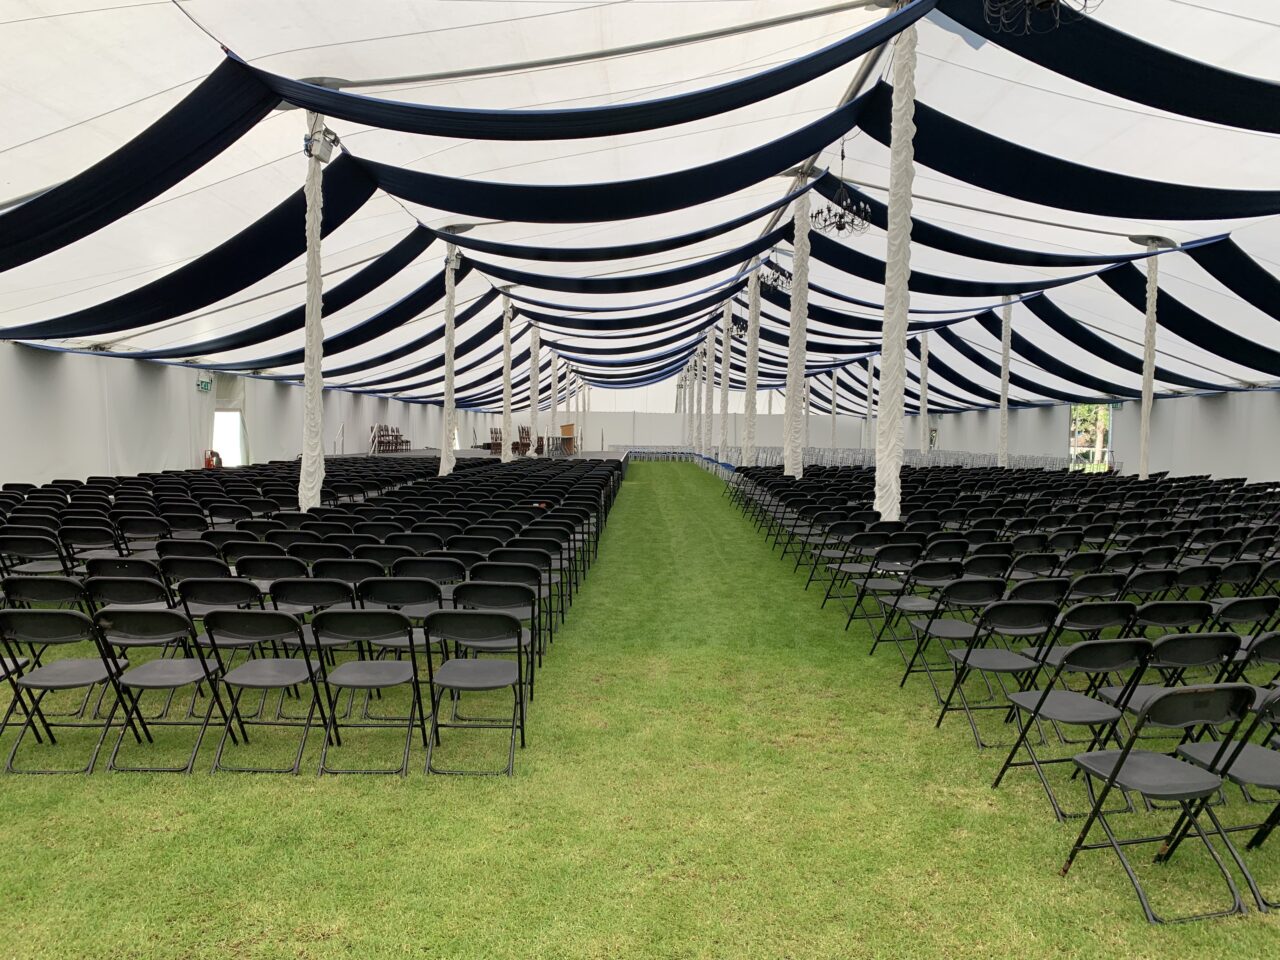 Flat floor seating inside graduation marquee solution for oundle school